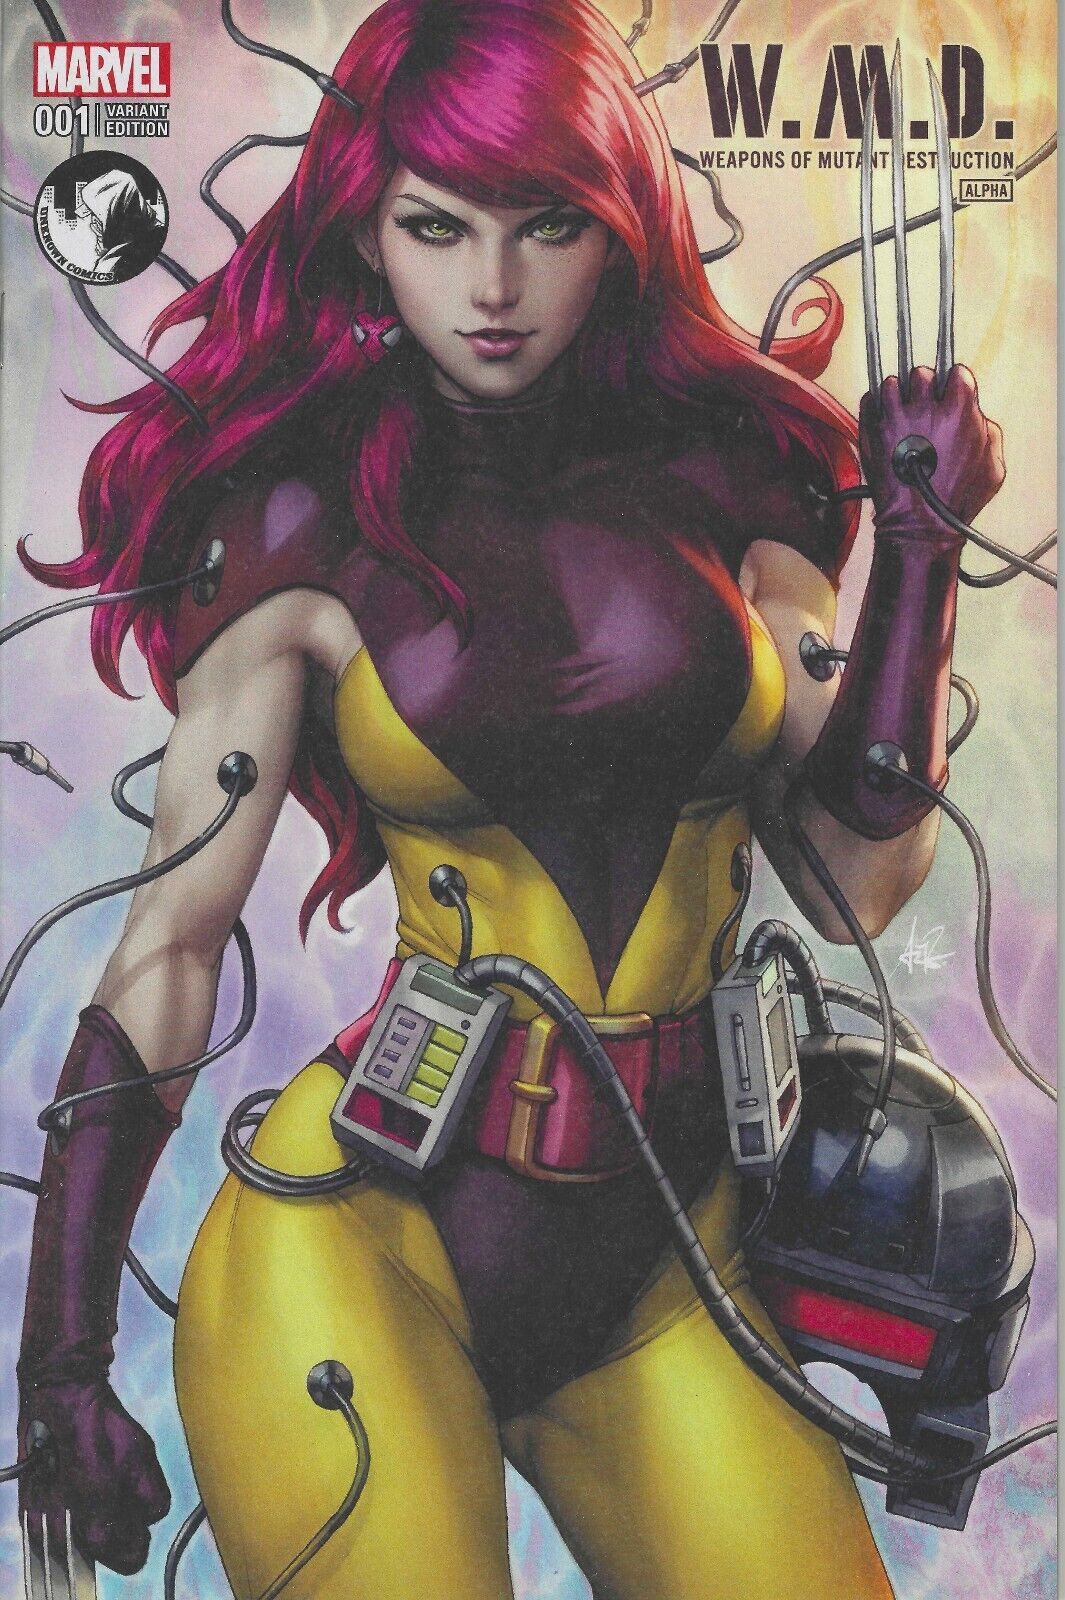 W.M.D. Weapons of Mutant Destruction ALPHA #1 MaryJane cover by Artgerm NM